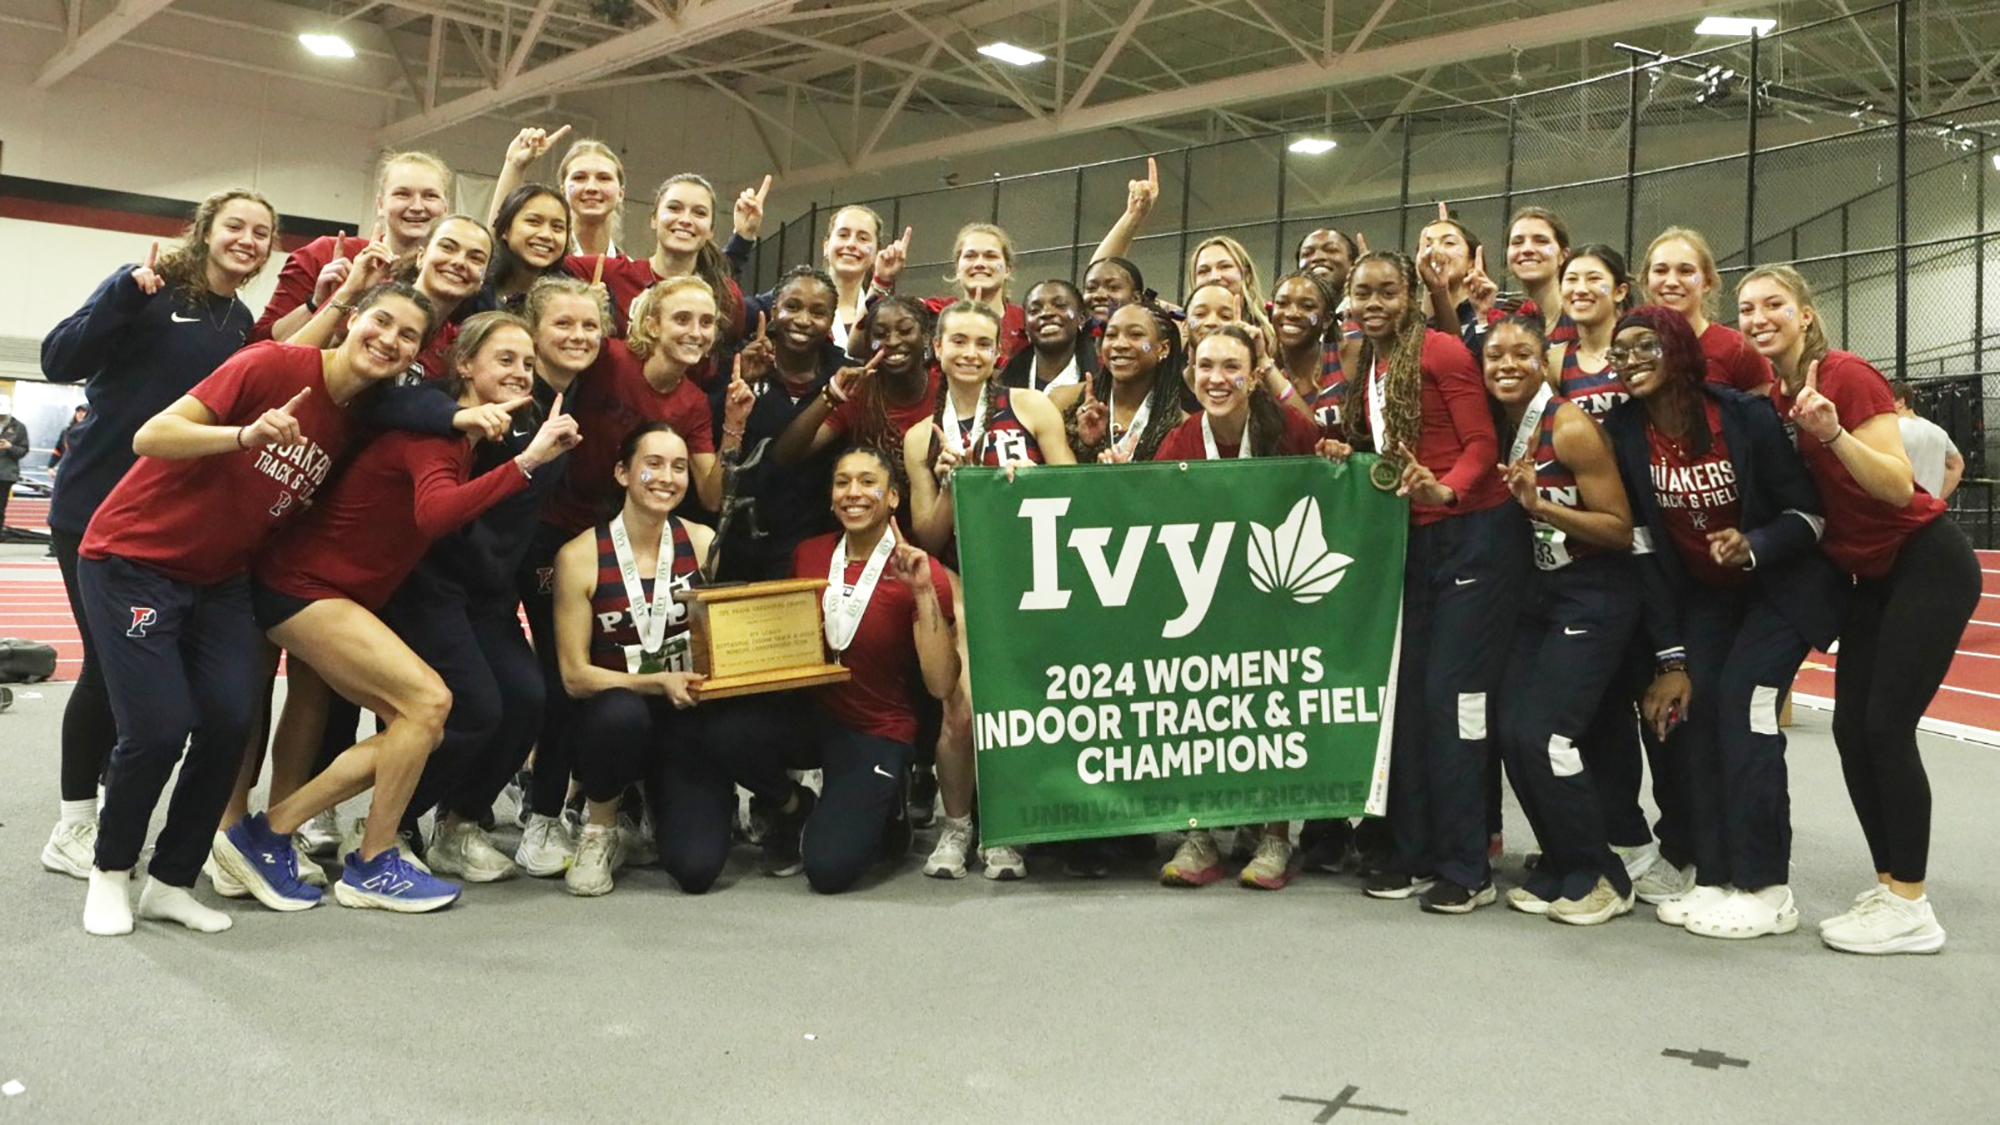 Members of the women's track and field team pose with the Indoor Ivy Heps championship banner after winning the competition at Harvard.